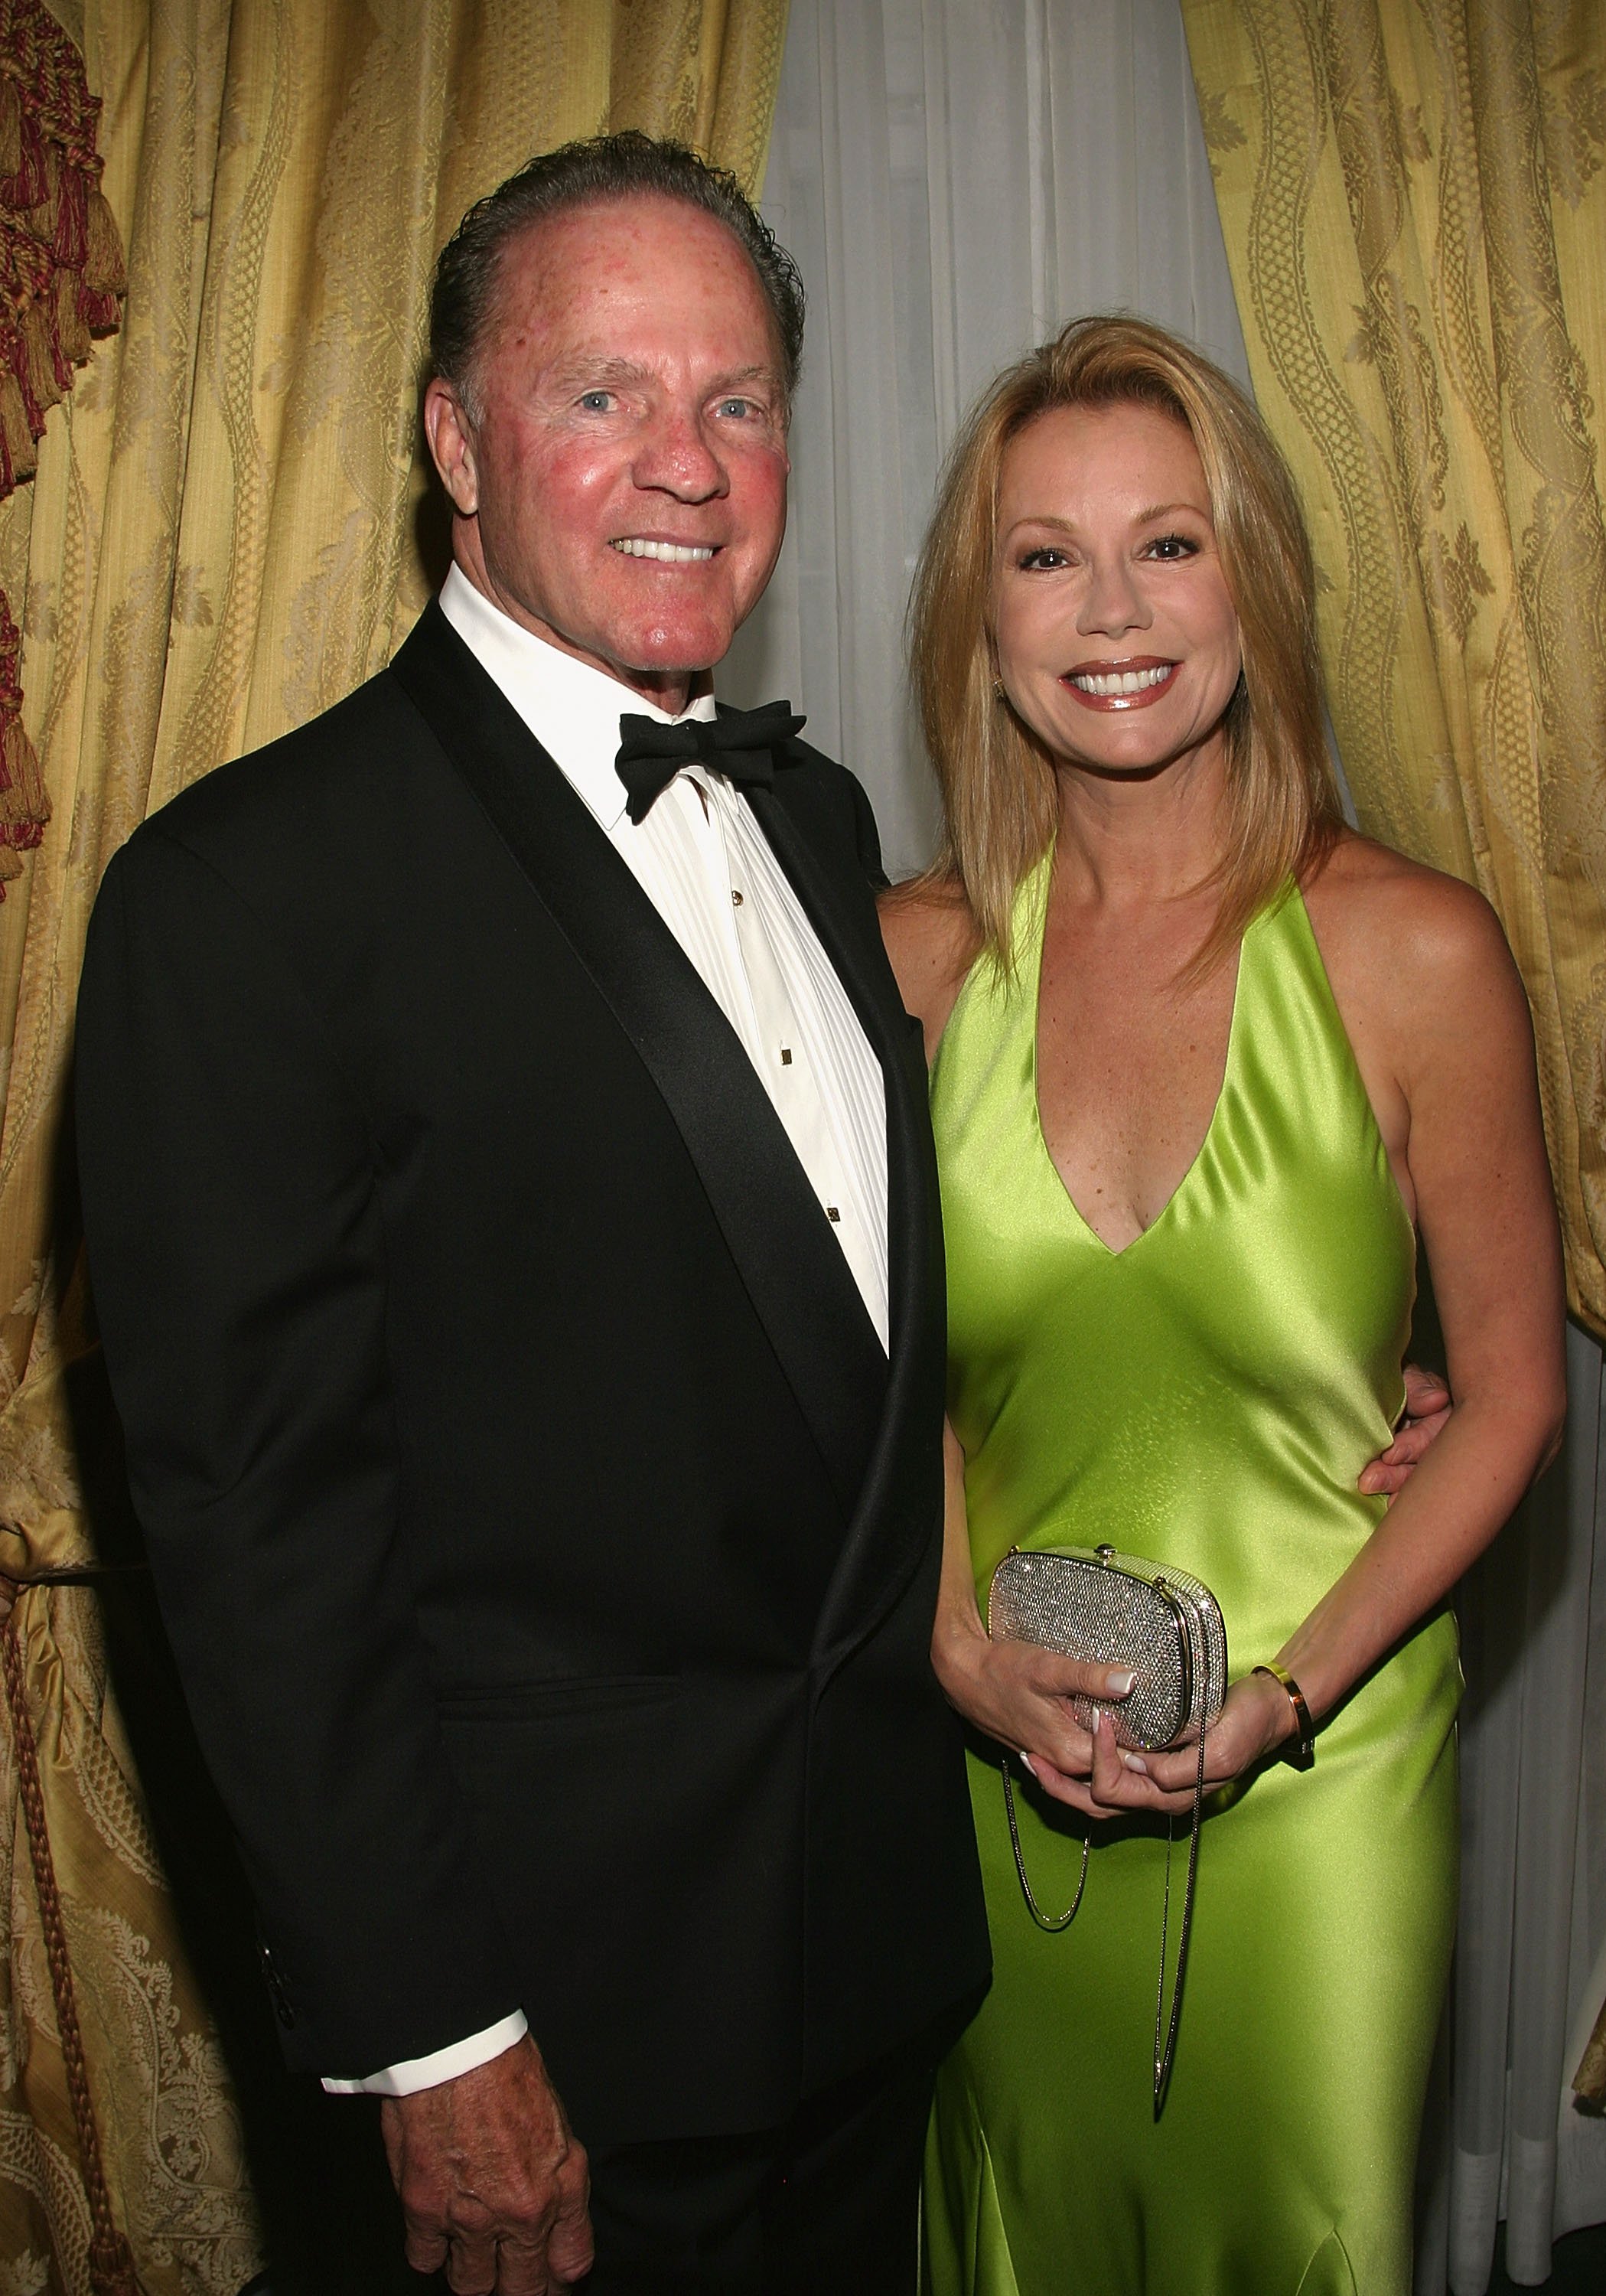 Former Sportcaster Frank Gifford and Television personality Kathy Lee Gifford attend the Bal Du Prentemps Benefit for the Parkinsons Disease Foundation on May 18, 2004 in New York City. | Source: Getty Images